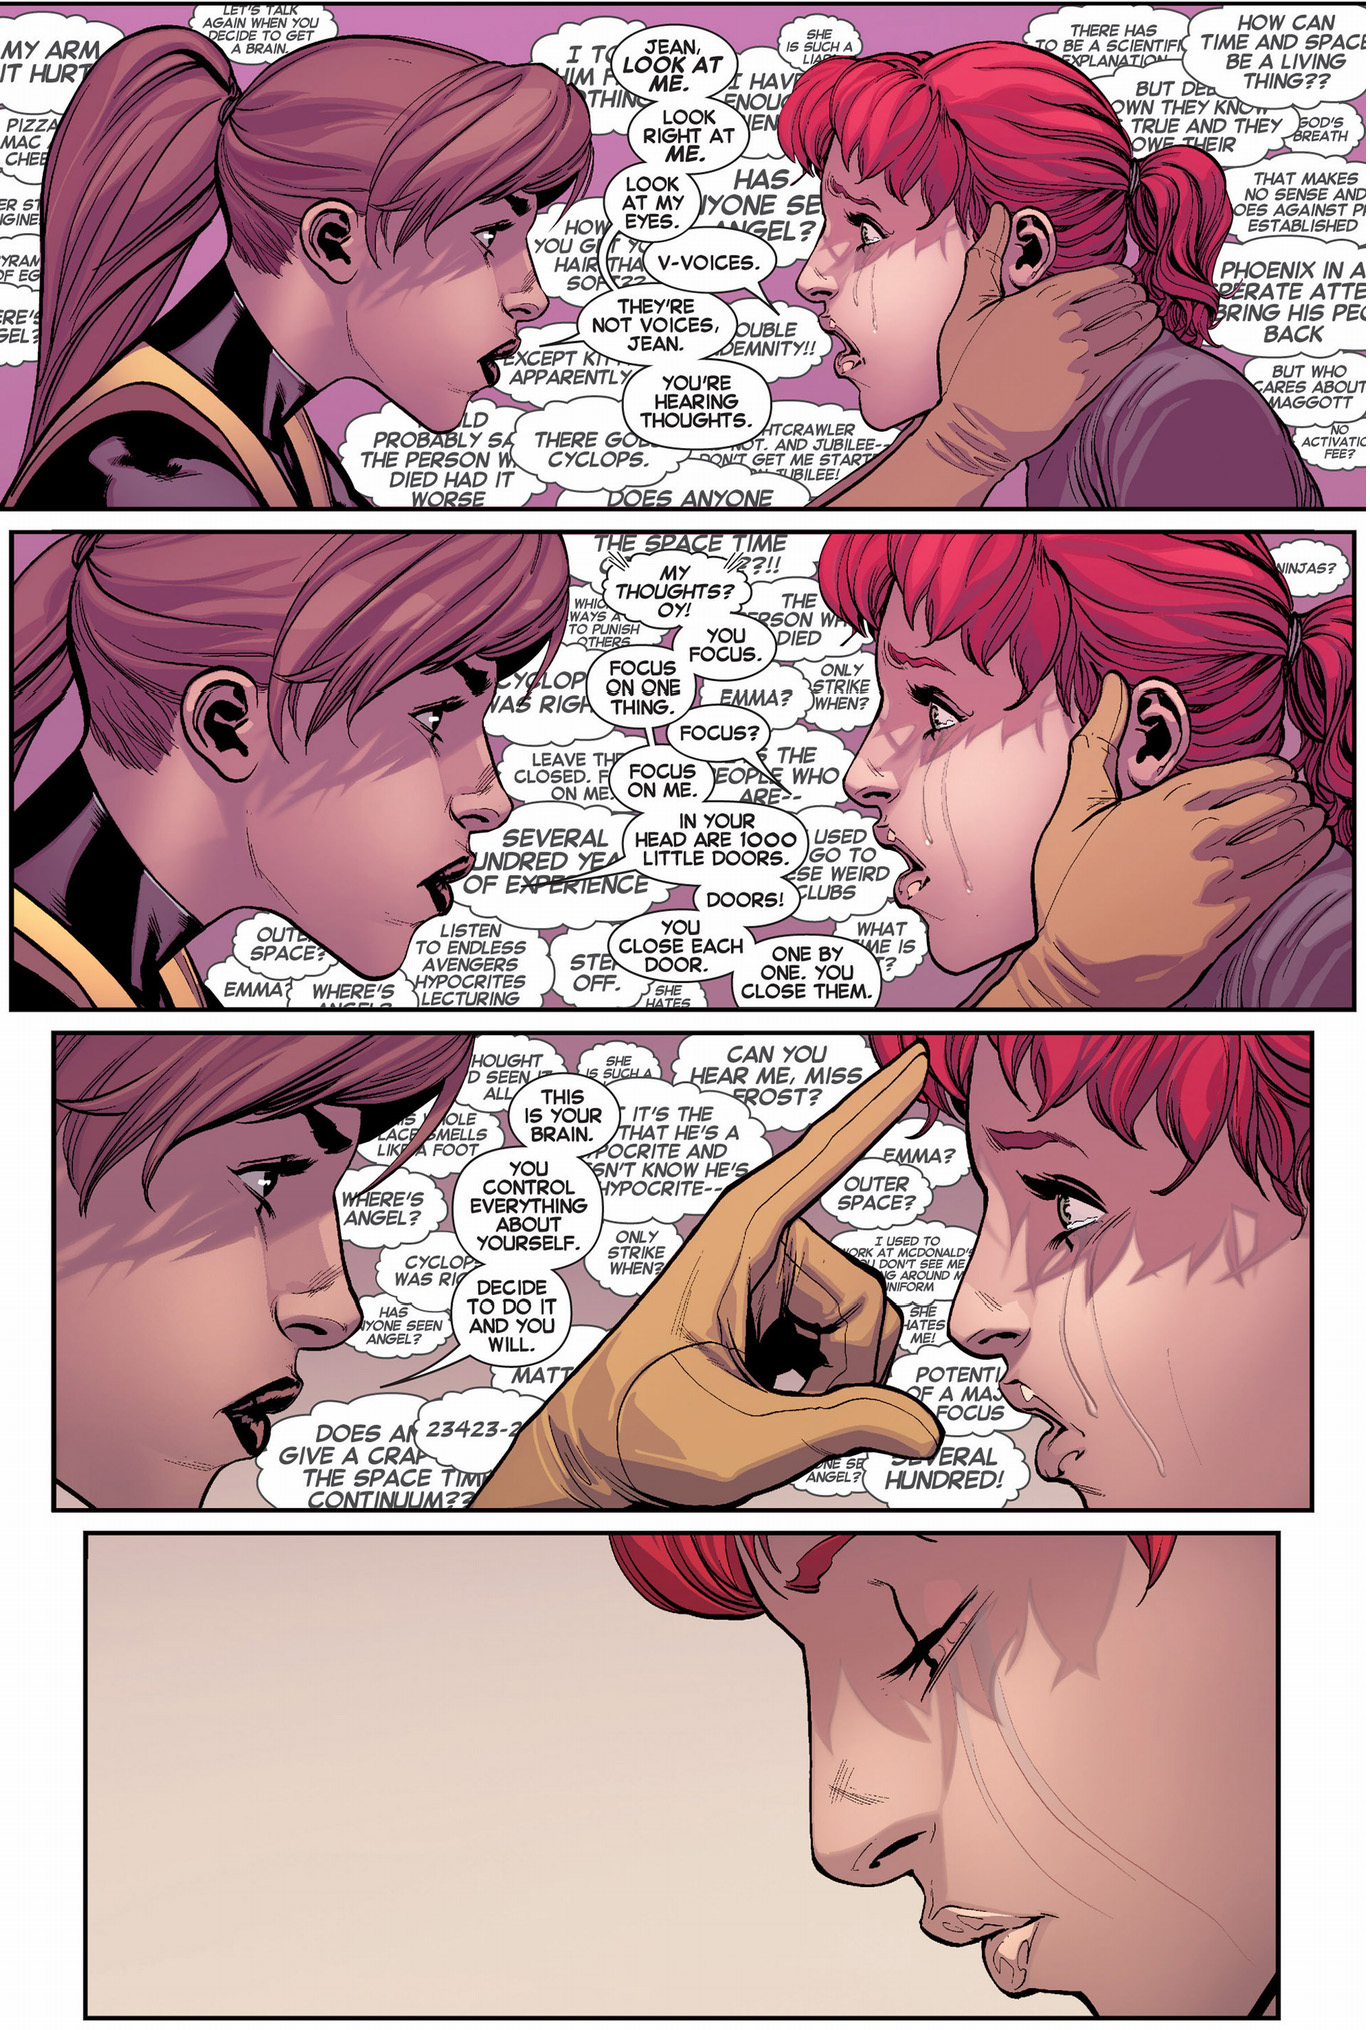 kitty pryde helps original 5 jean grey with her telepathy